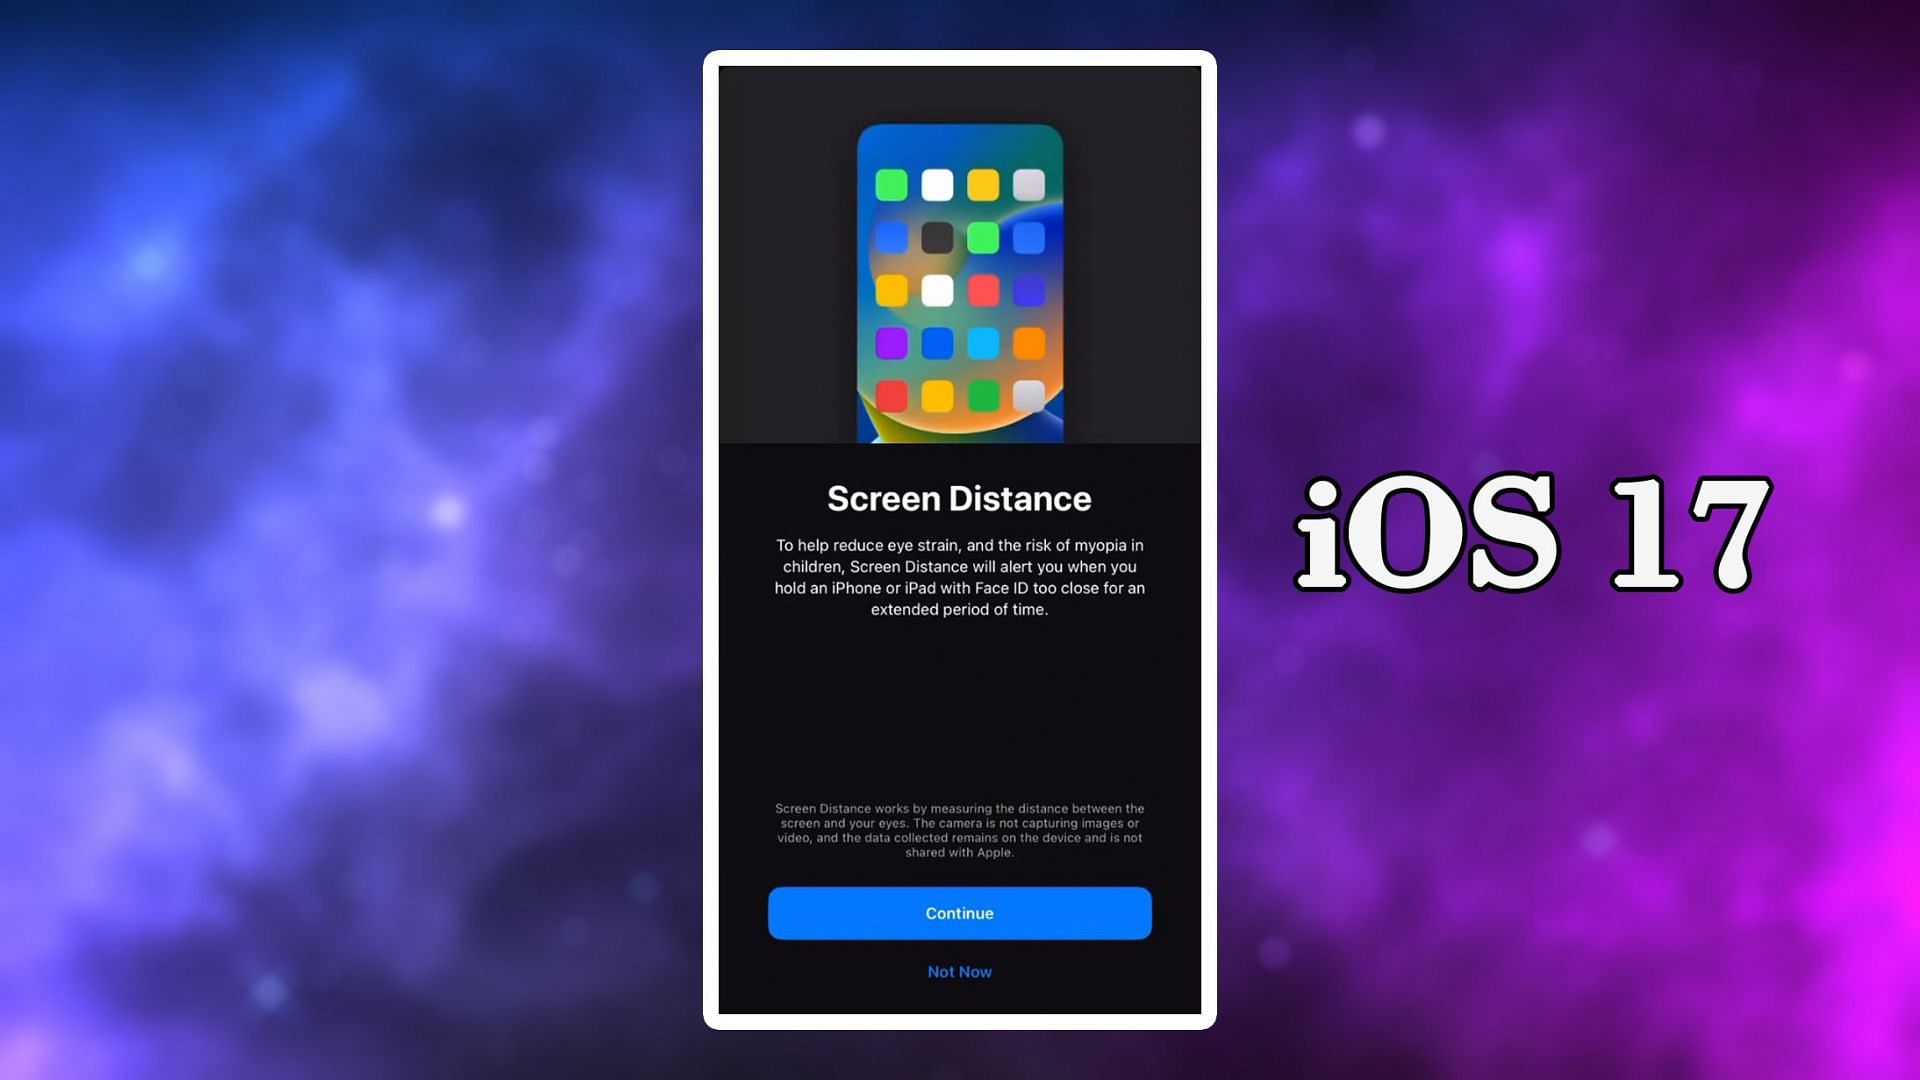 The iPhone Screen Distance is a prominent new feature included in iOS 17.